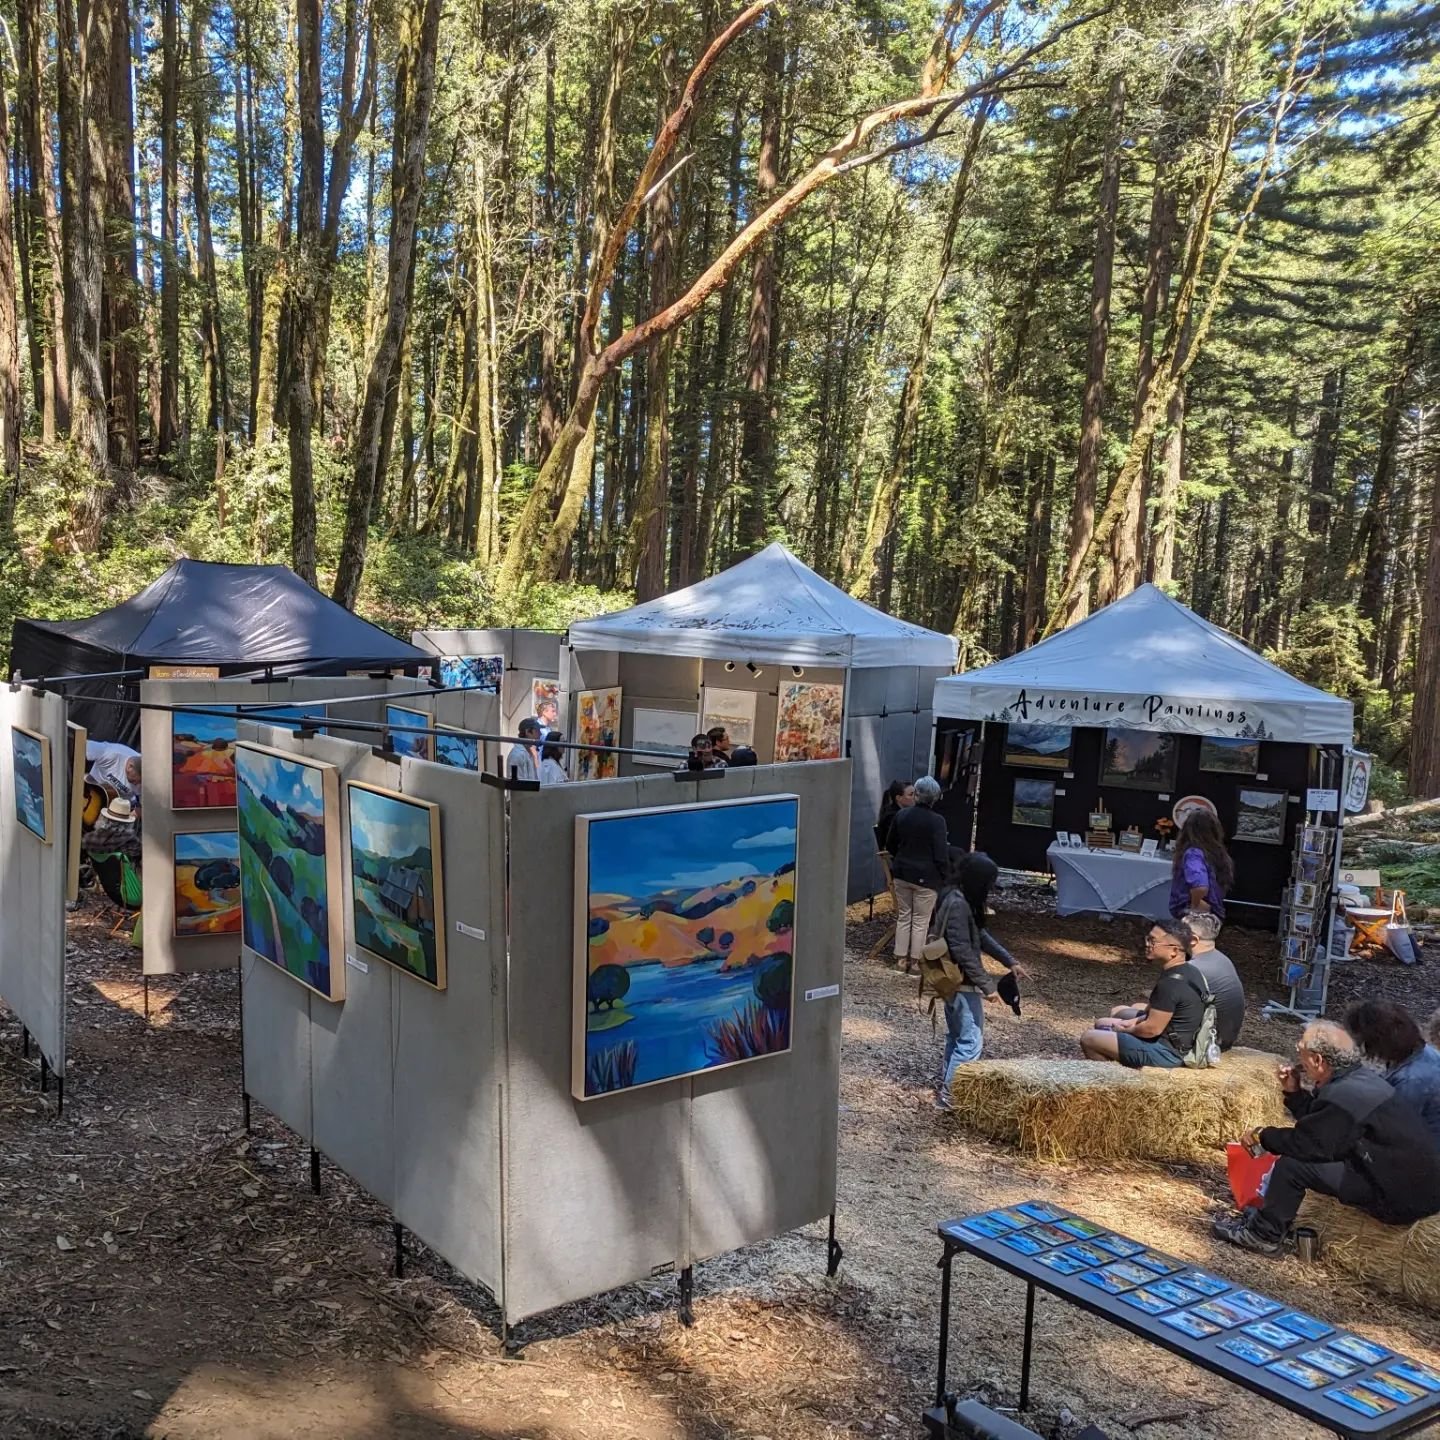 Thanks Kings Mountain for a super show in such a great location...it's all left for the banana slugs, deer and its more shy inhabitants now until next year...

#kingsmountainartfair #stephaniemacleanartist #californialandscape #californiaredwoods